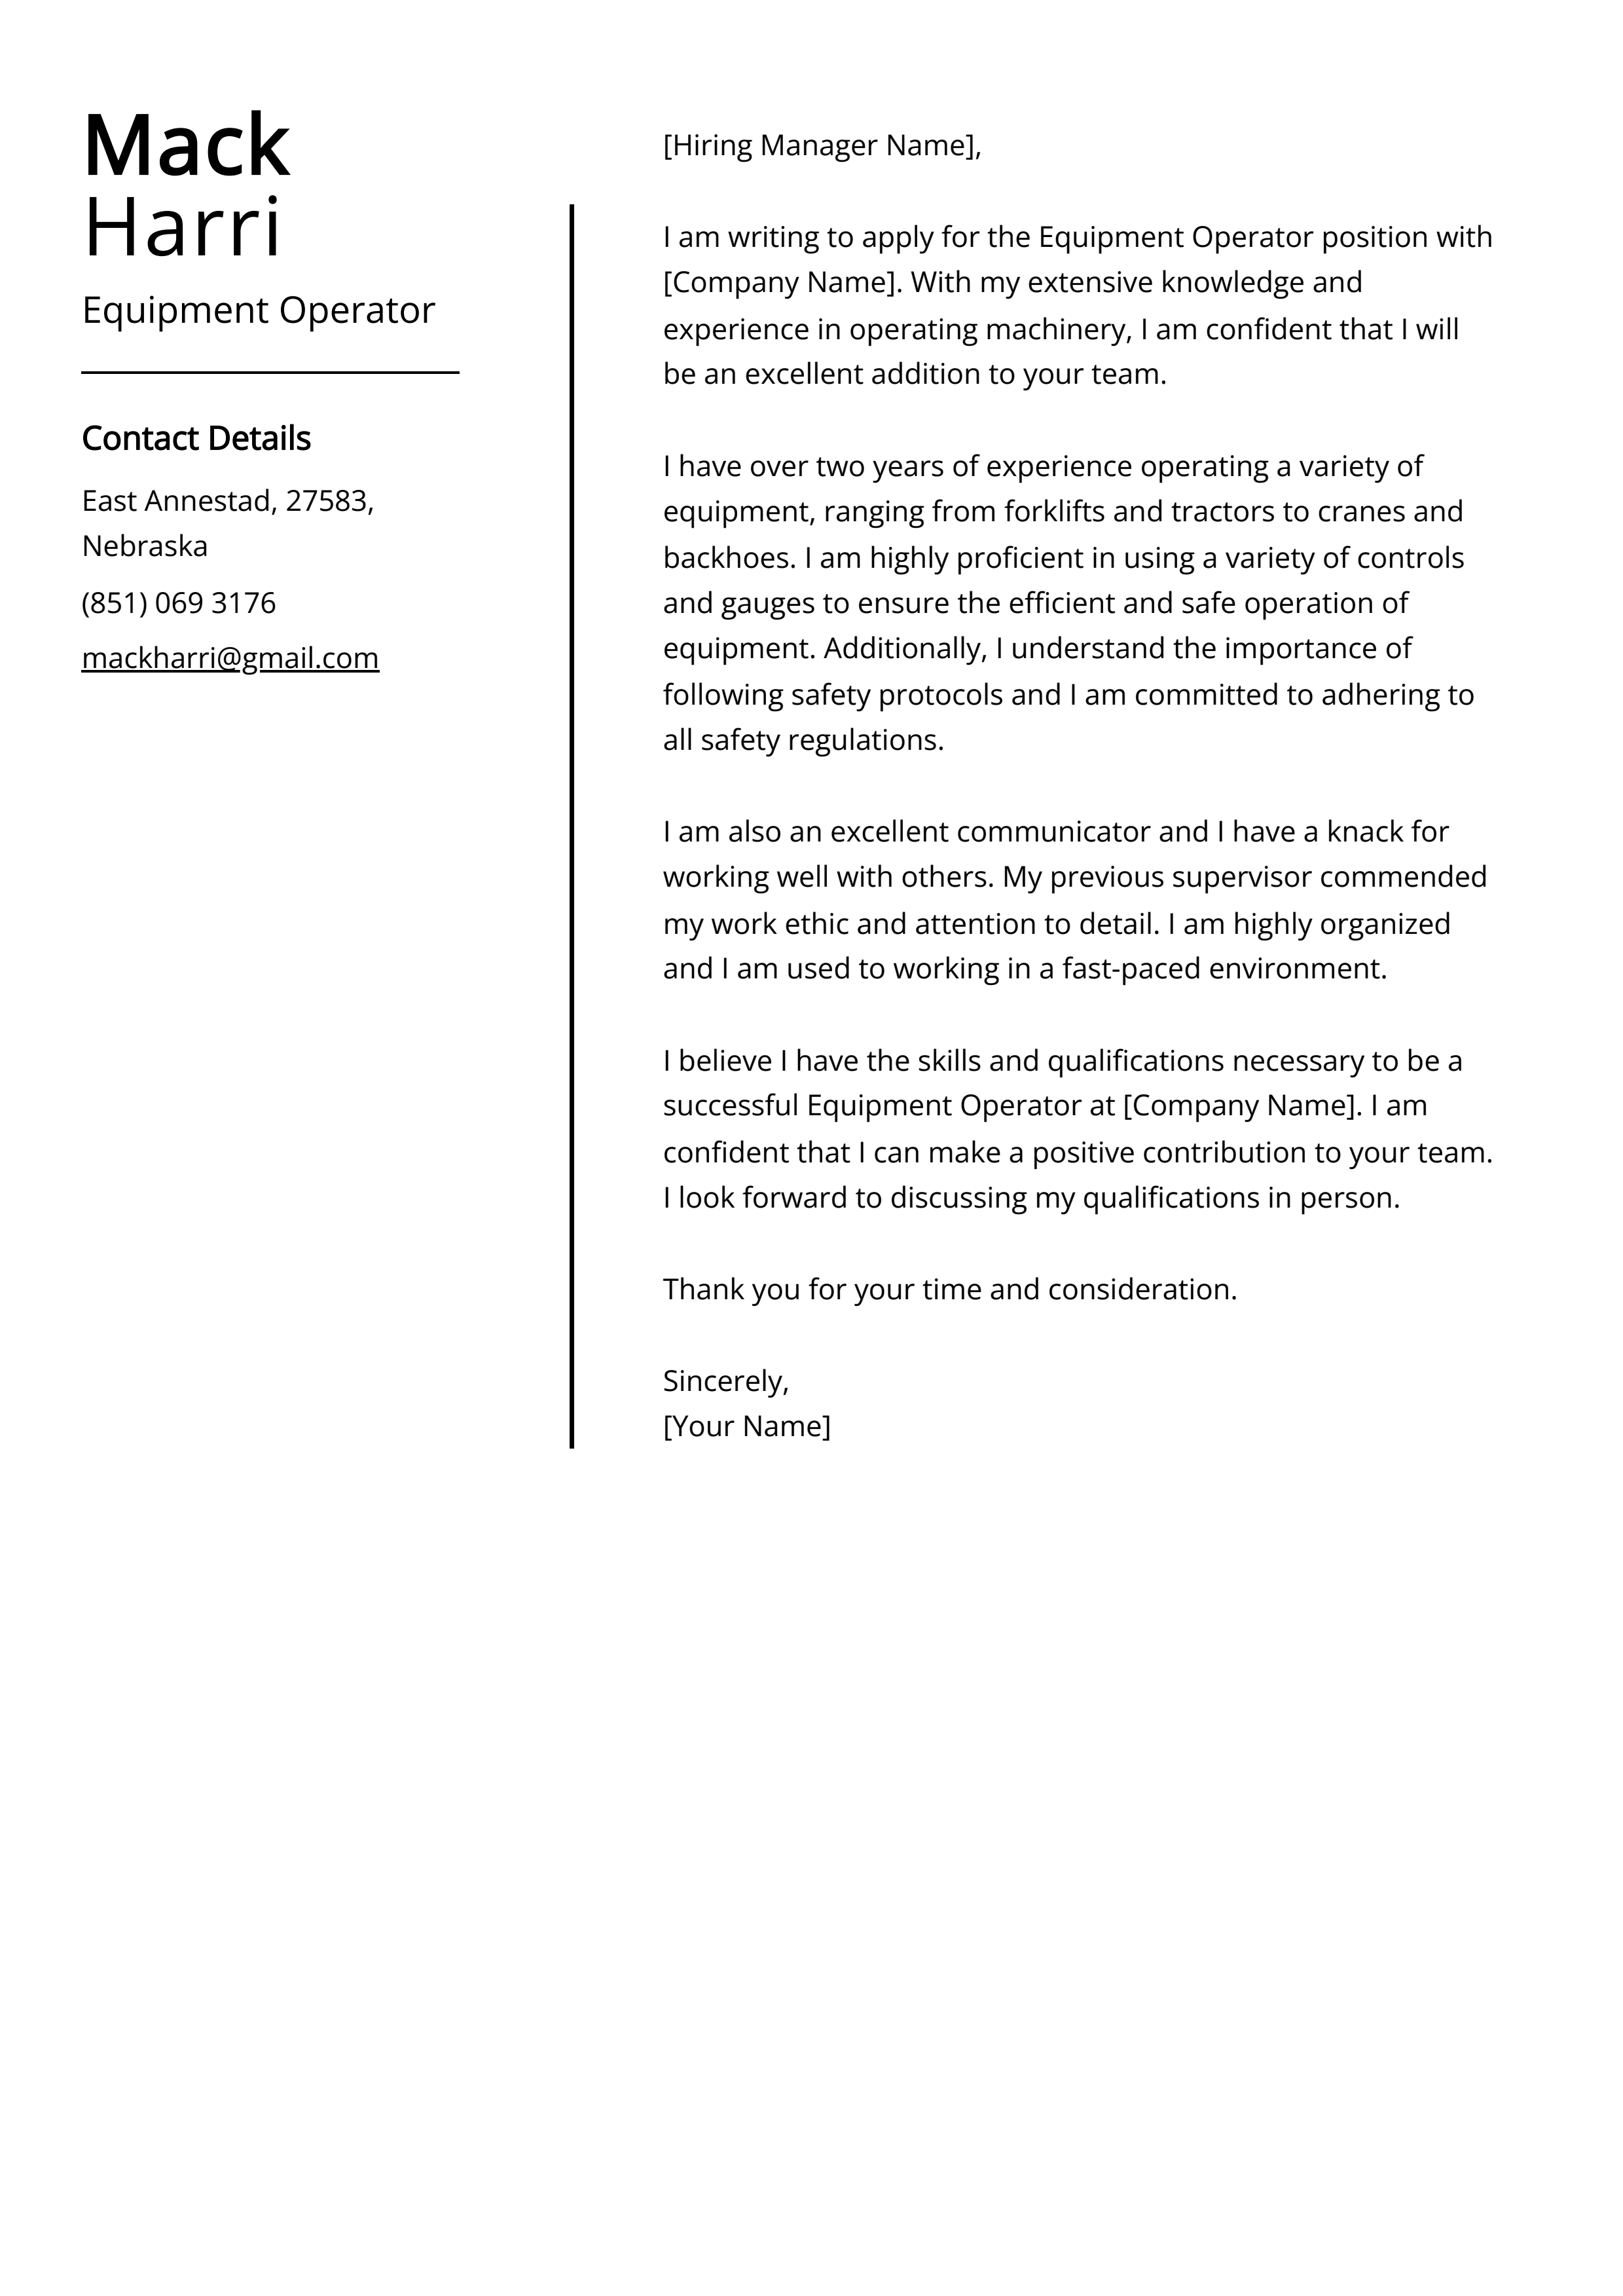 Equipment Operator Cover Letter Example